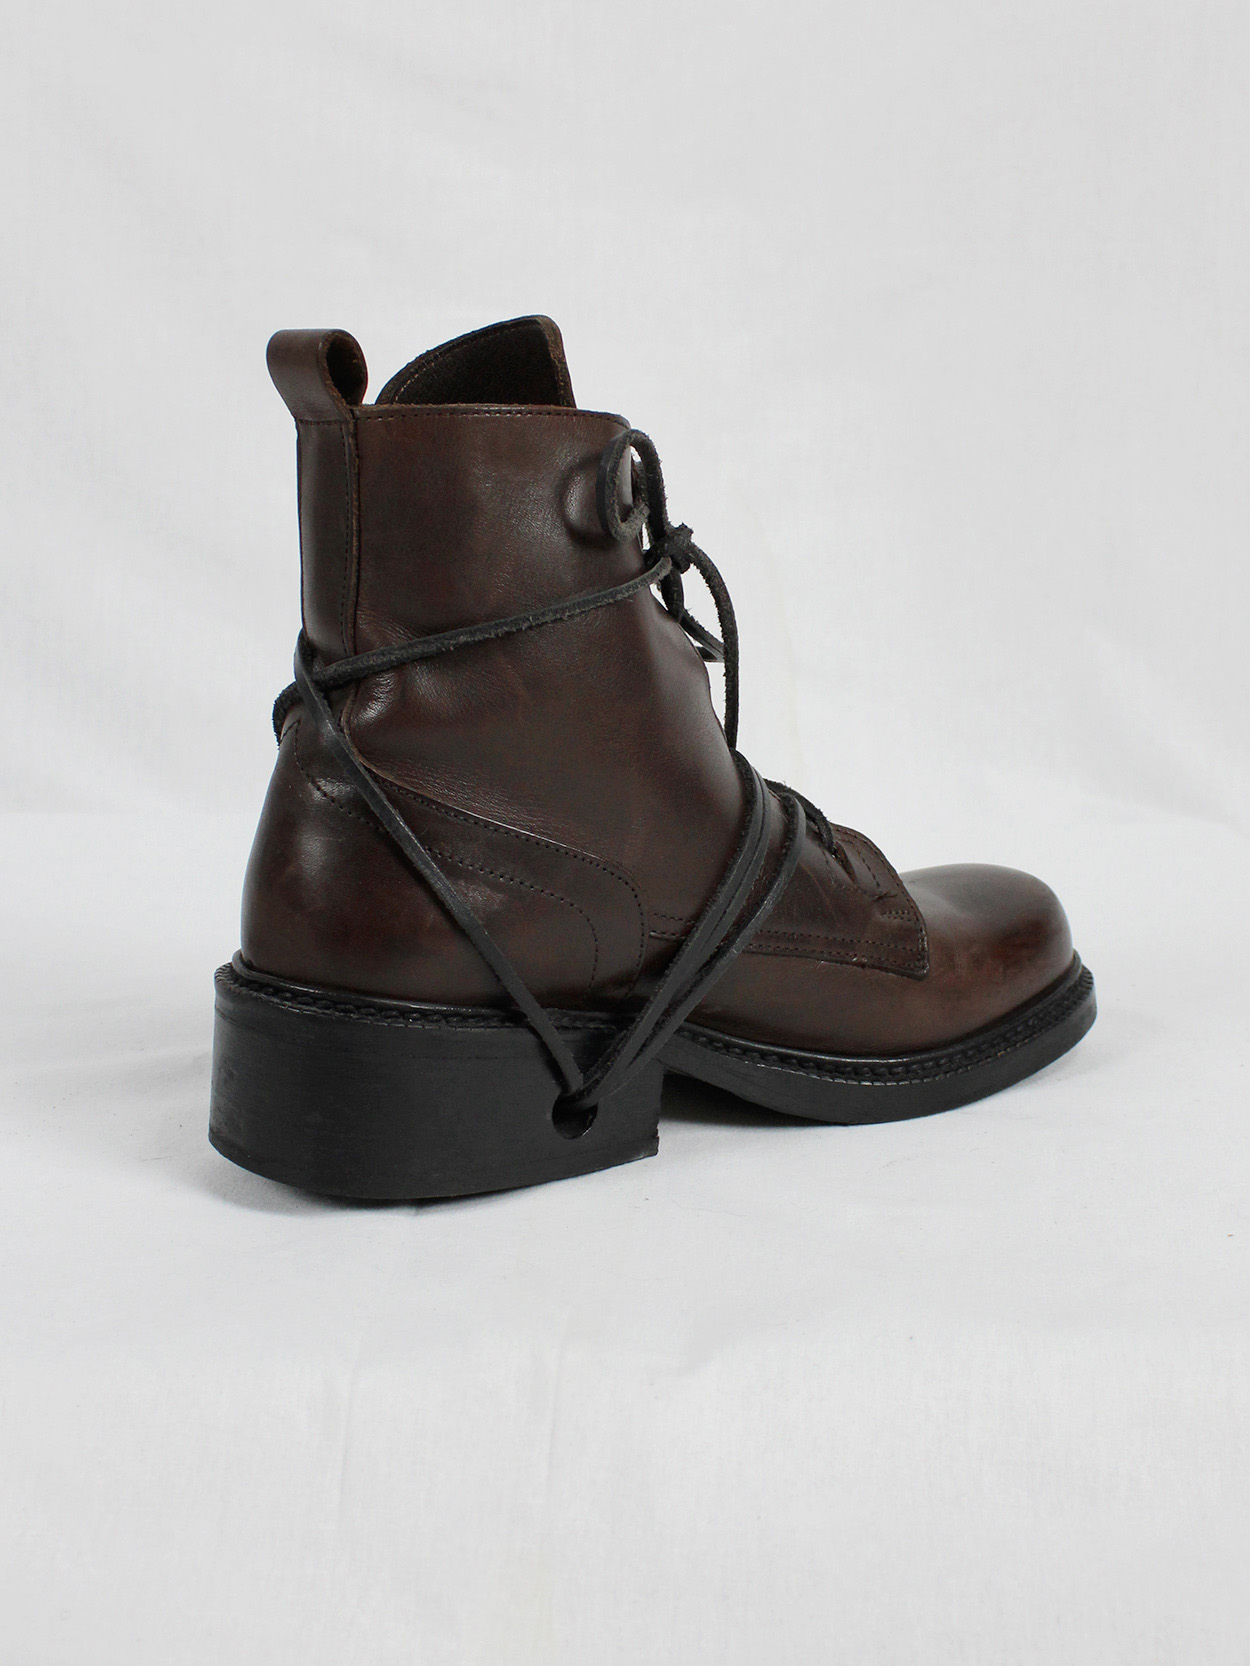 Dirk Bikkembergs brown tall boots with laces through the soles vaniitas (20)